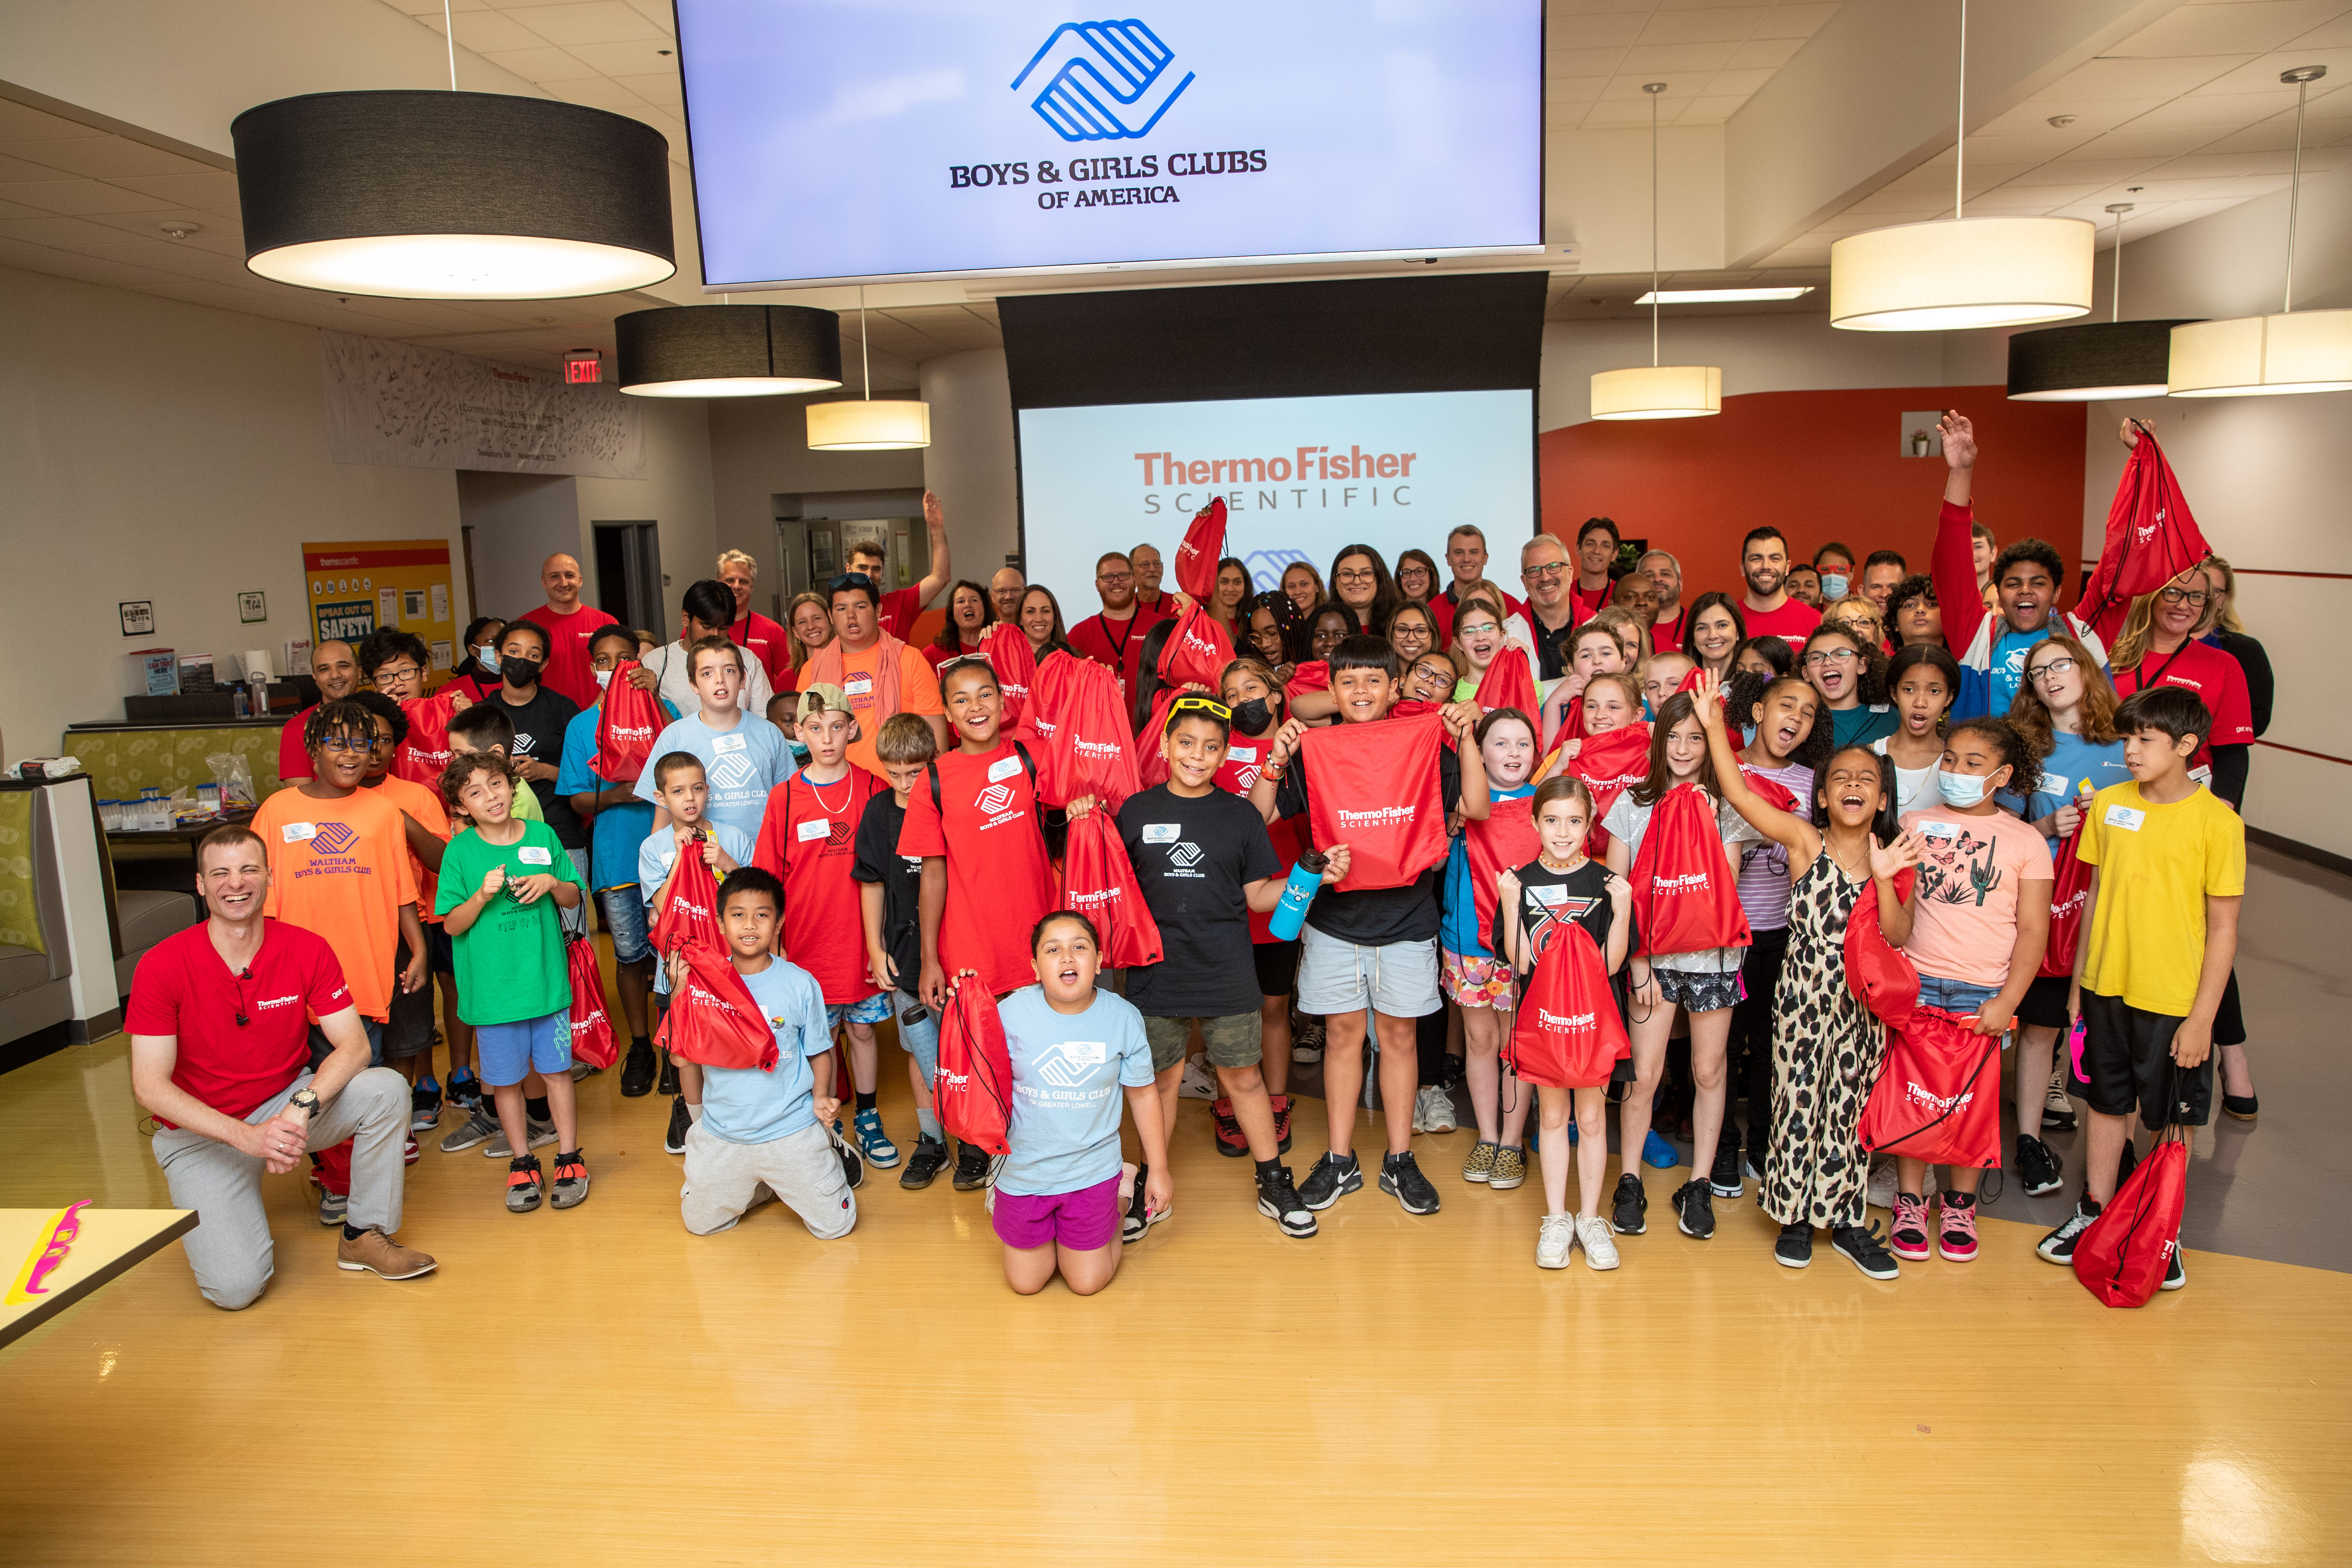 Boys and Girls Clubs of America visits Thermo Fisher Scientific on Wednesday, June 29, 2022 in Tewksbury, Mass. (Scott Eisen/AP Images for Boys and Girls Clubs of America)